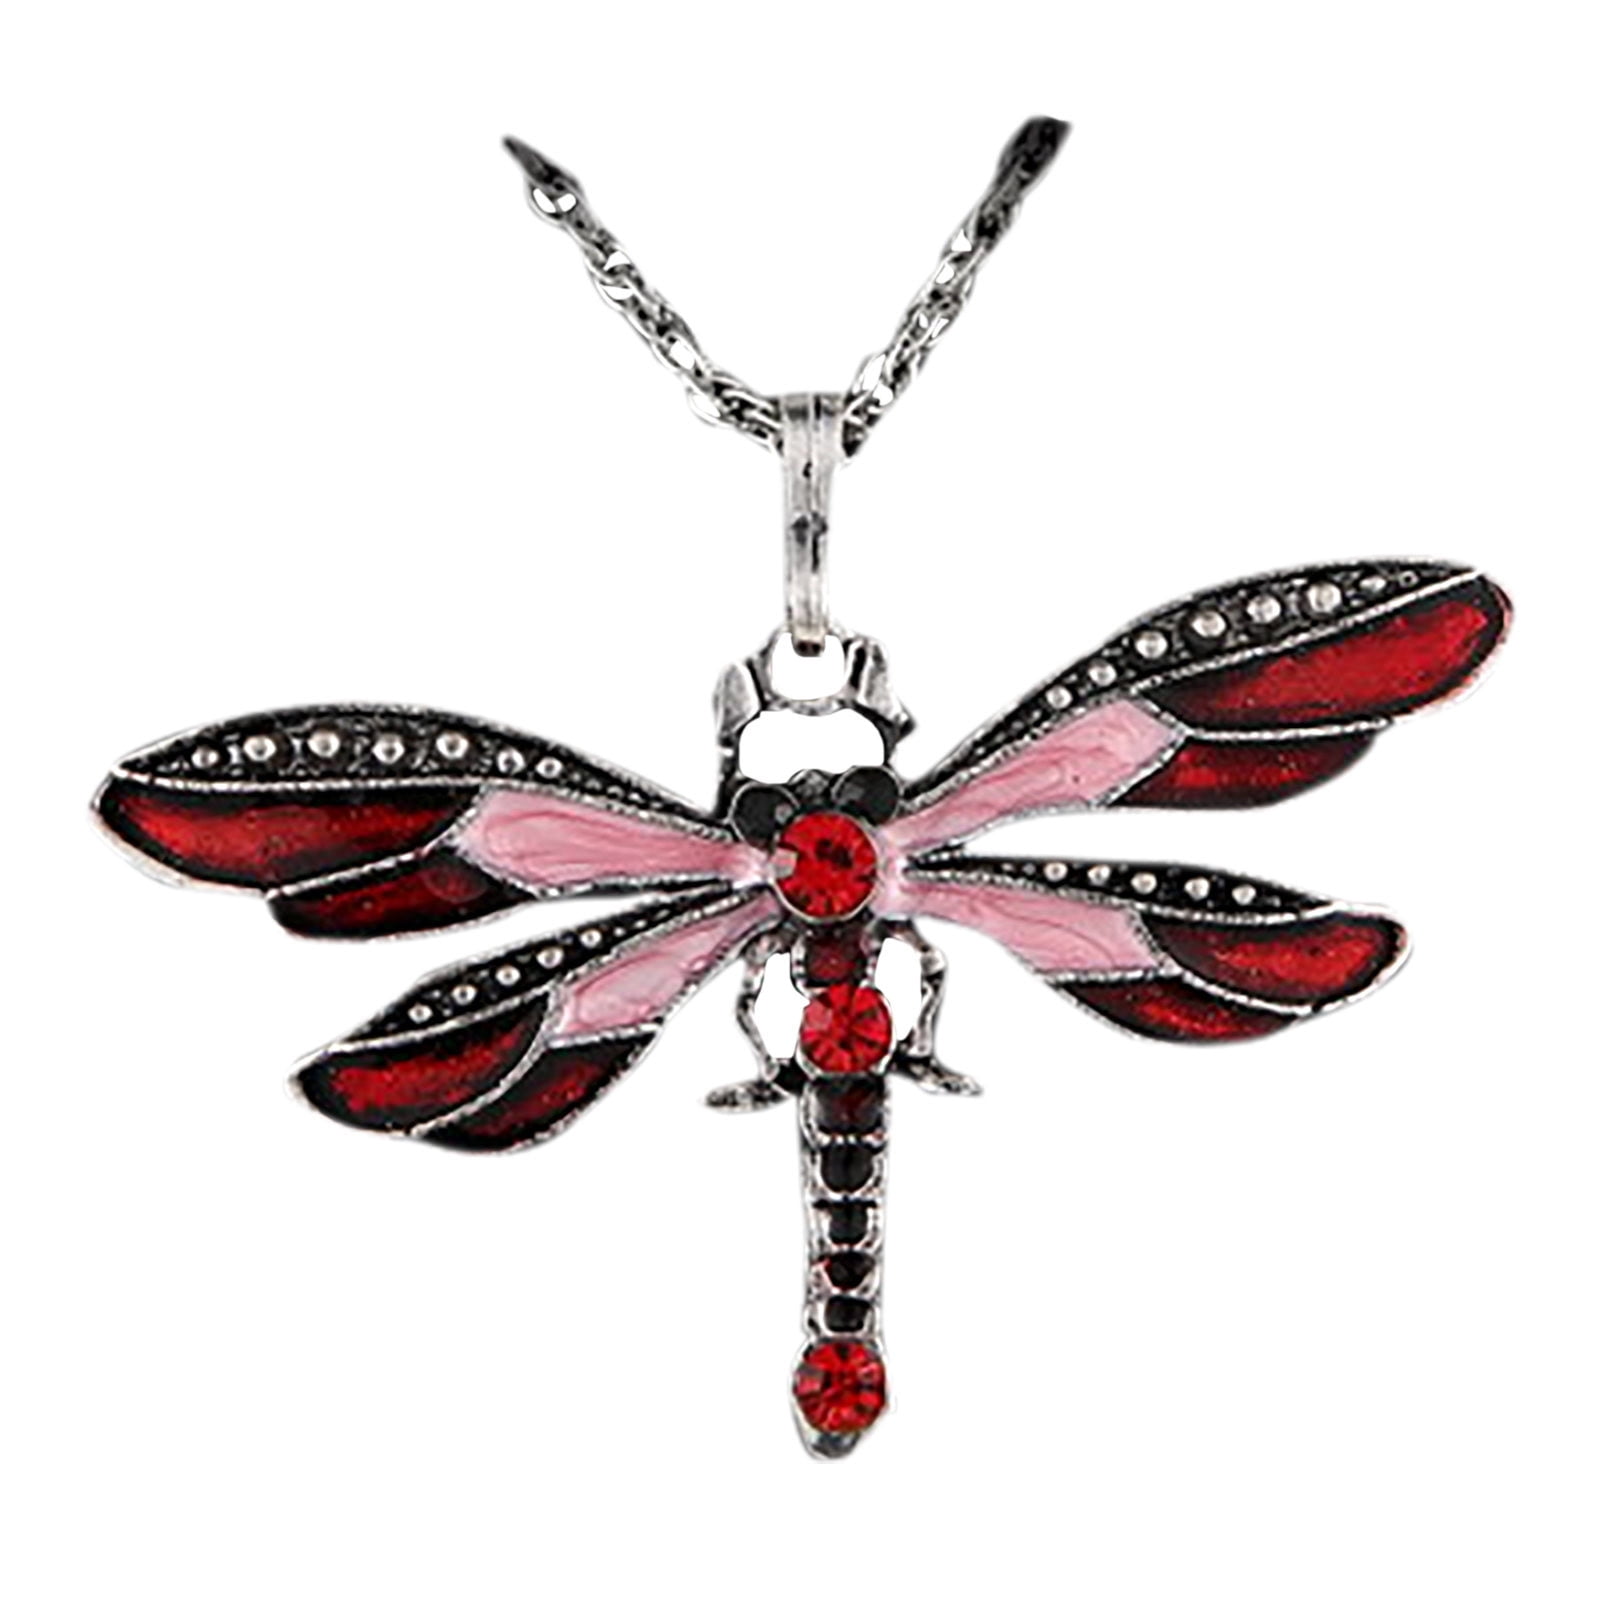 Fashion 18K Gold Dragonfly Rose Red Fire Opal Charm Pendant Necklace Chain NEW ！